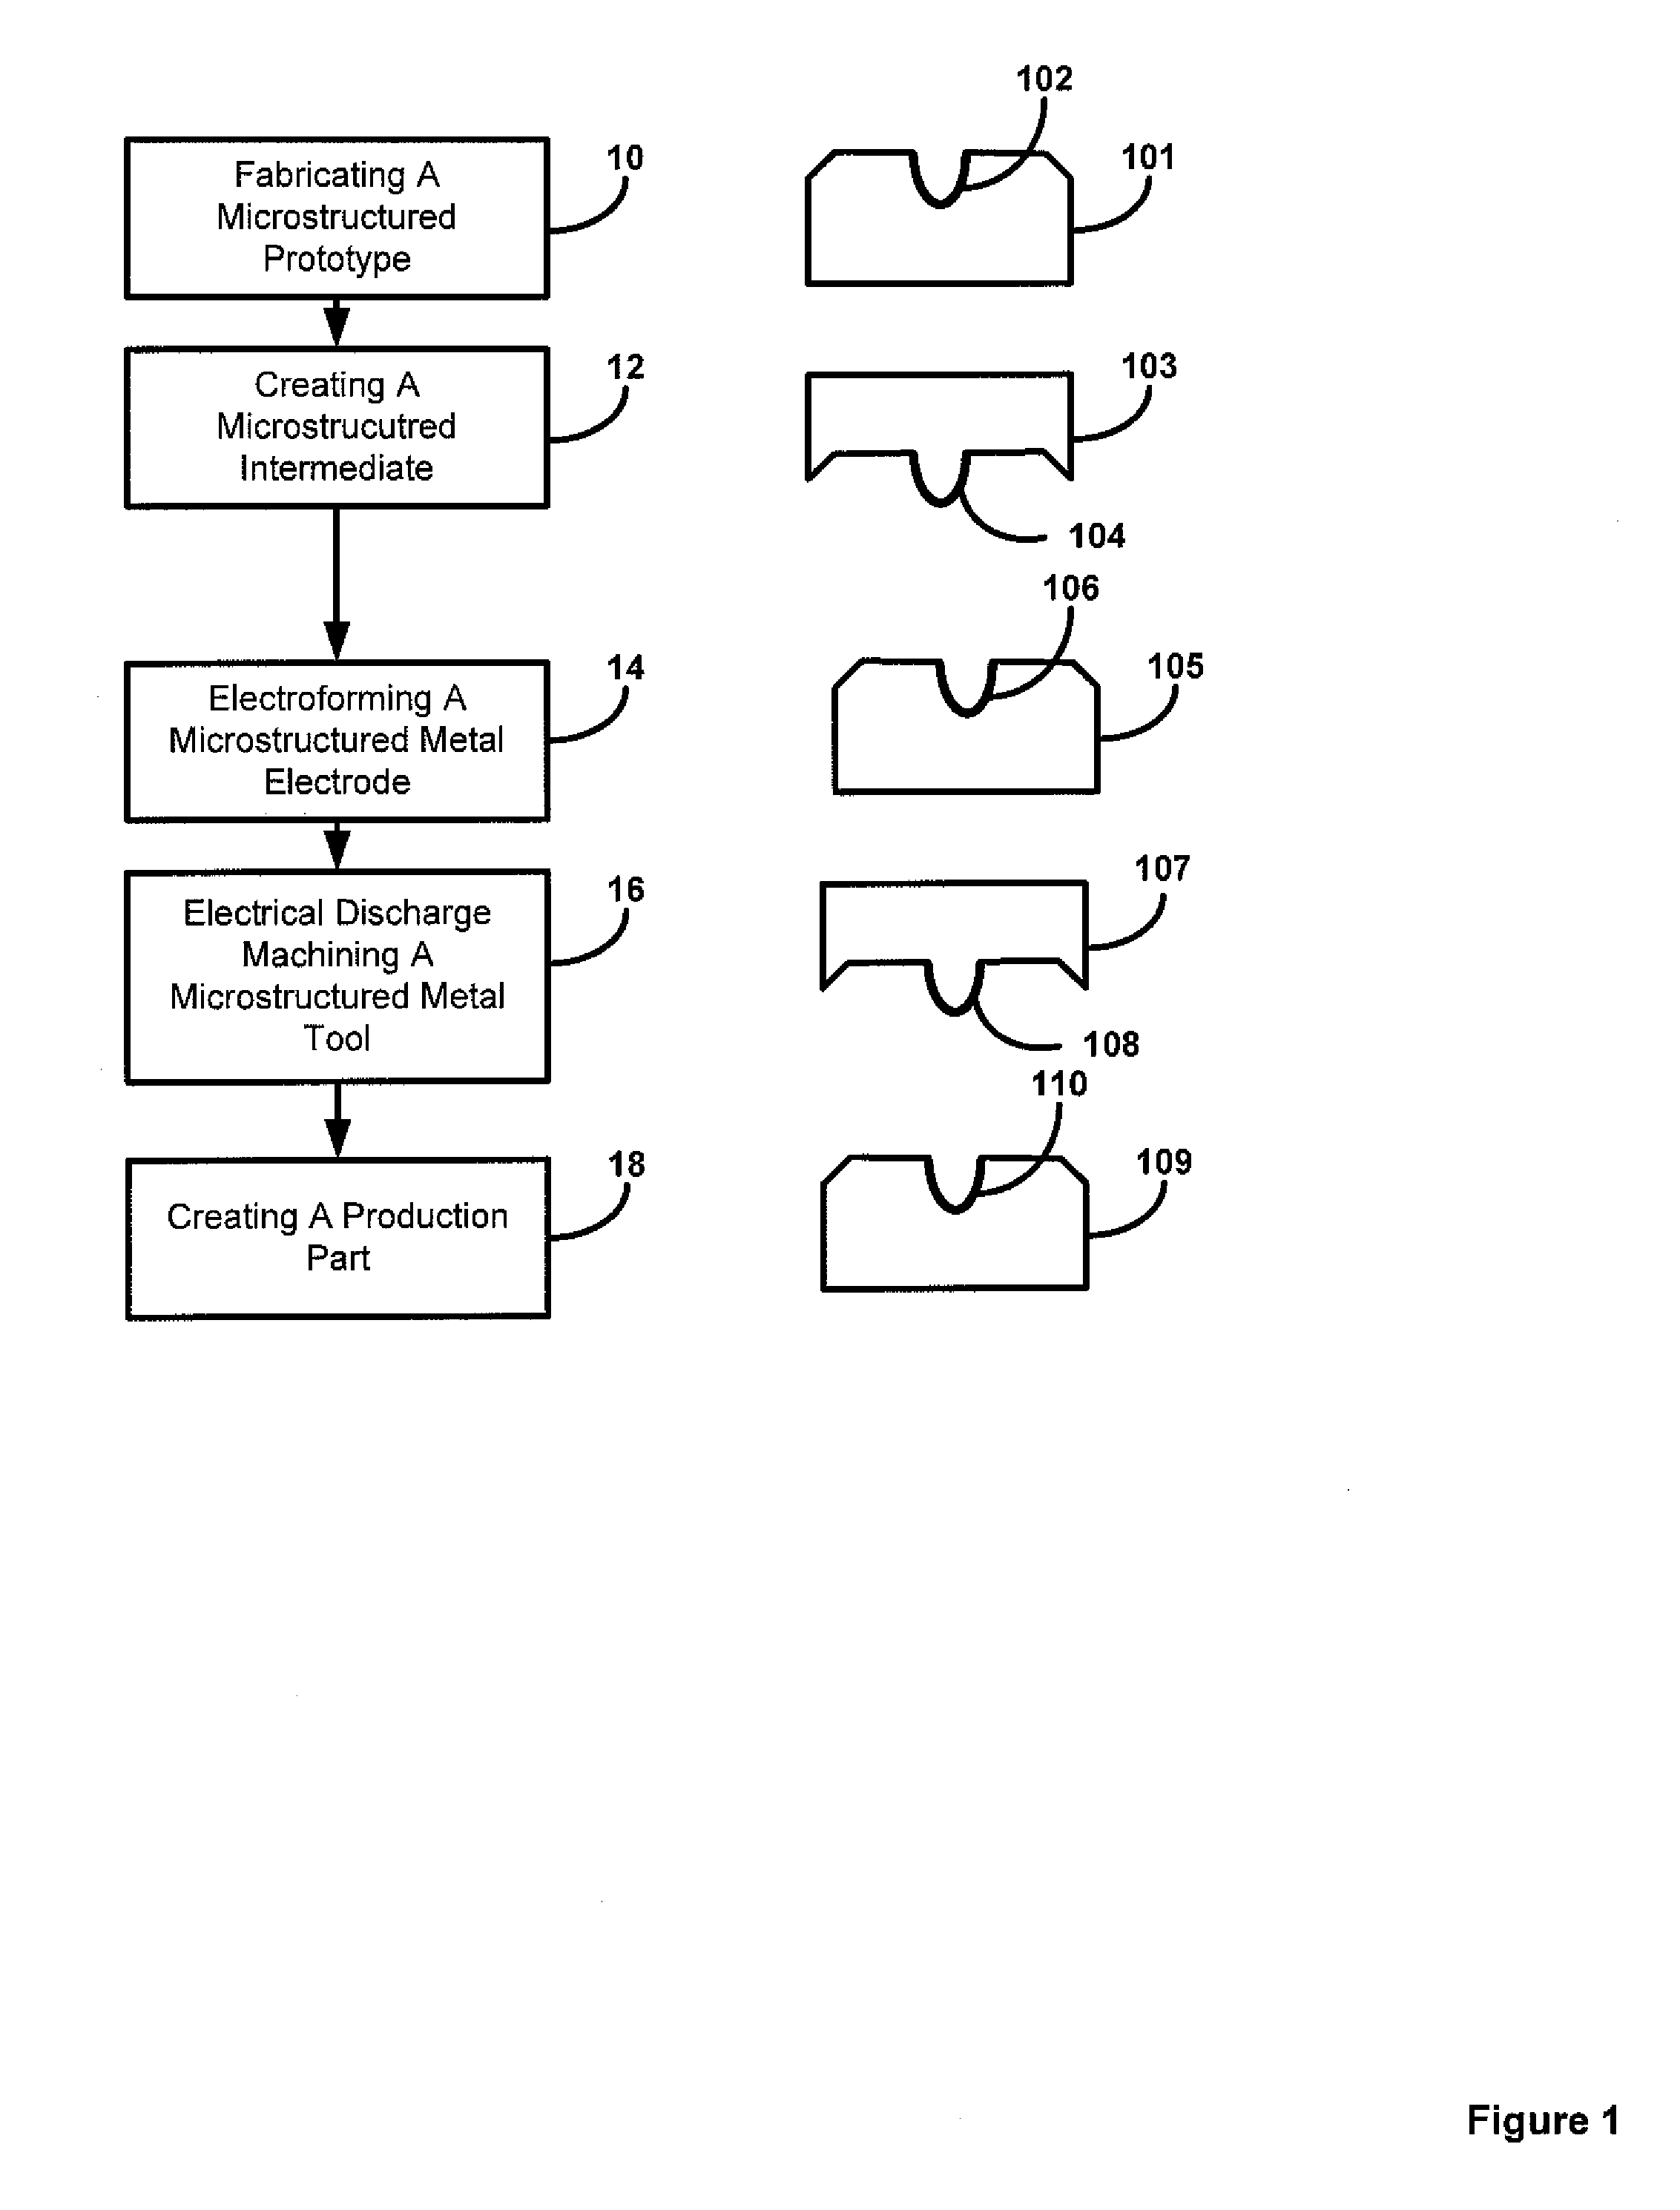 Method for making microstructured objects